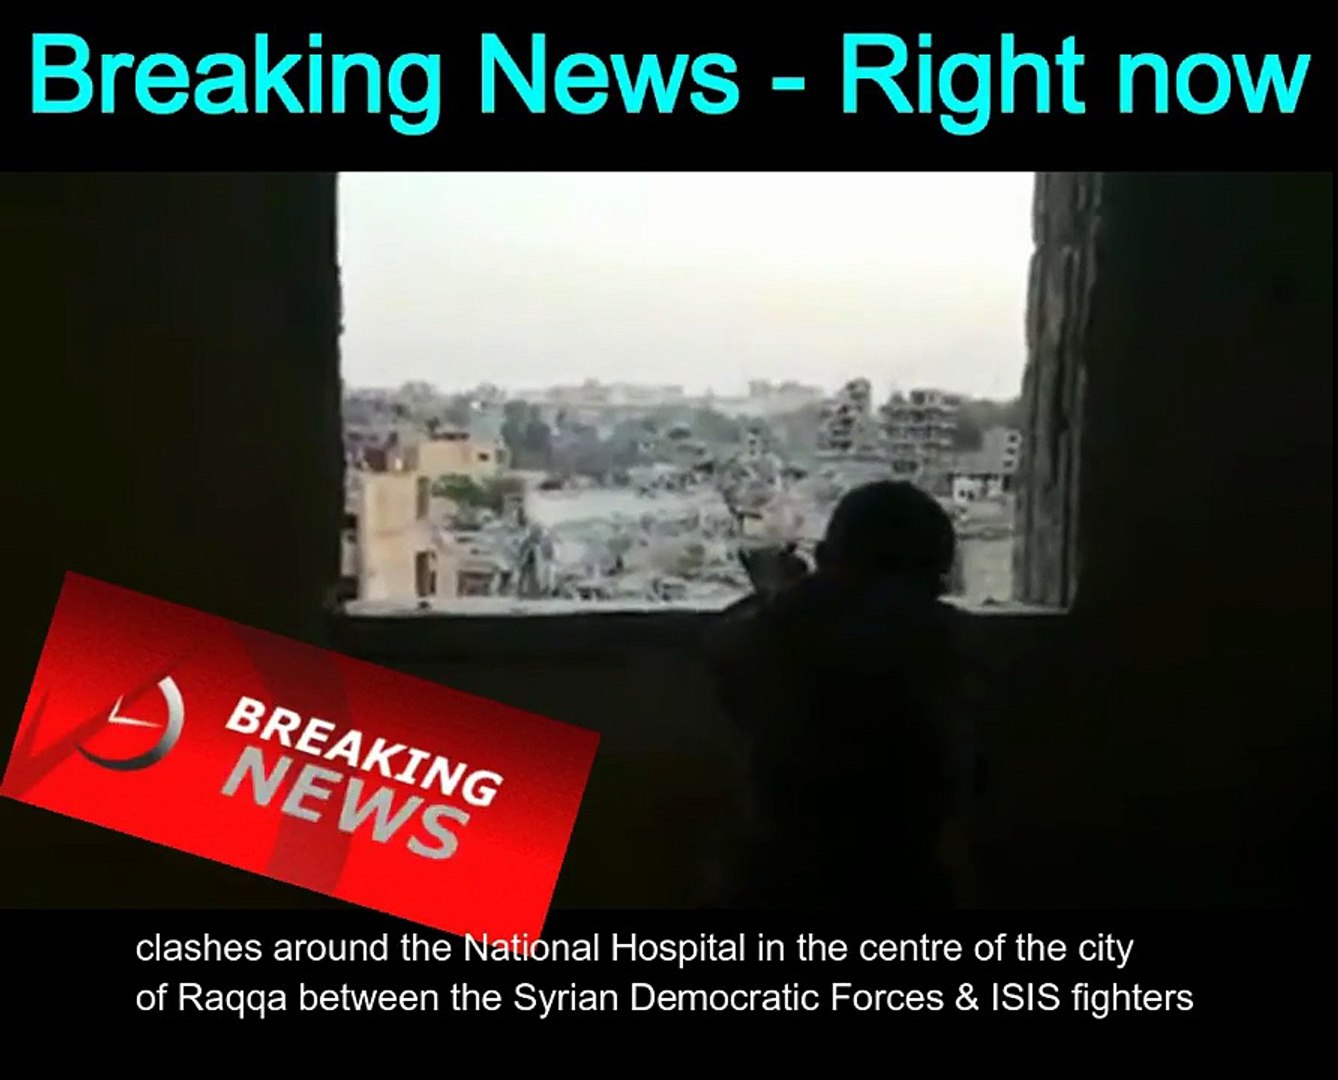 raqqa offensive latest news - clashes in the centre of the city [HD